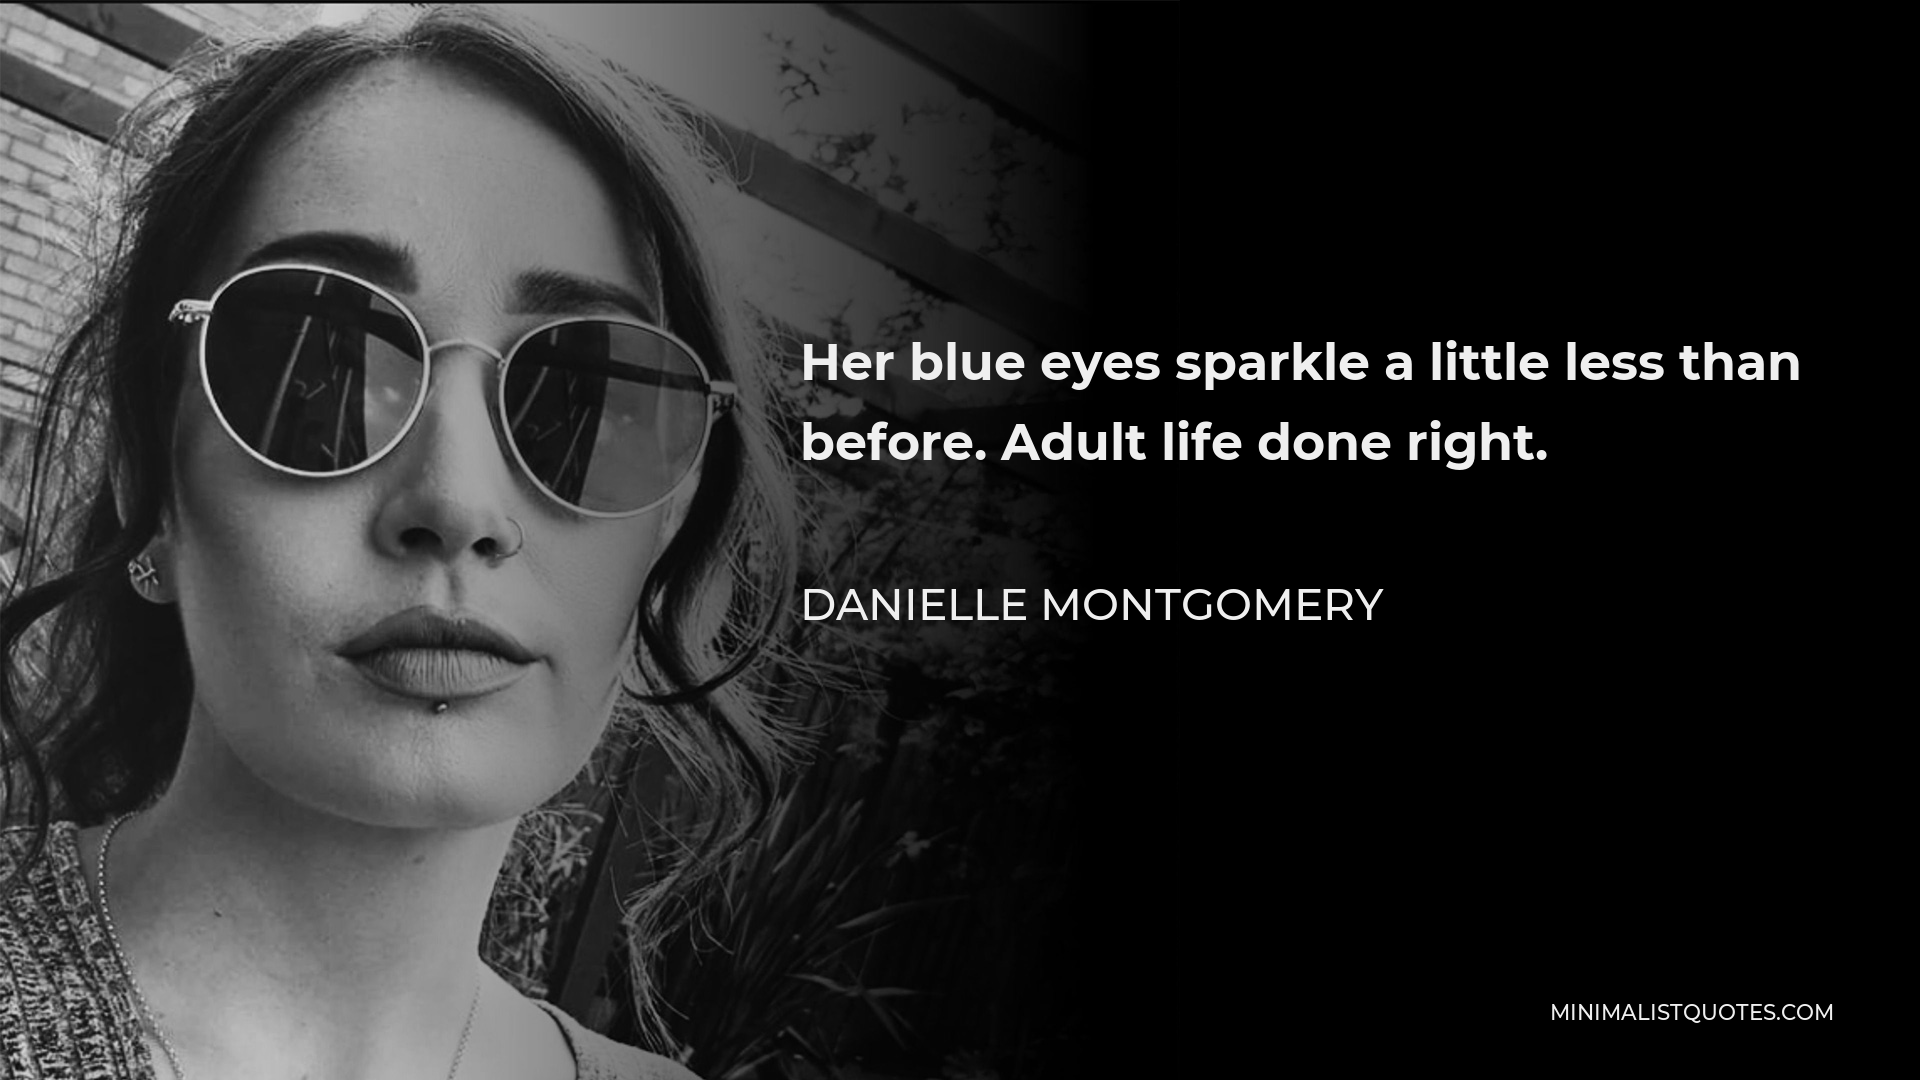 Danielle Montgomery Quote - Her blue eyes sparkle a little less than before. Adult life done right.